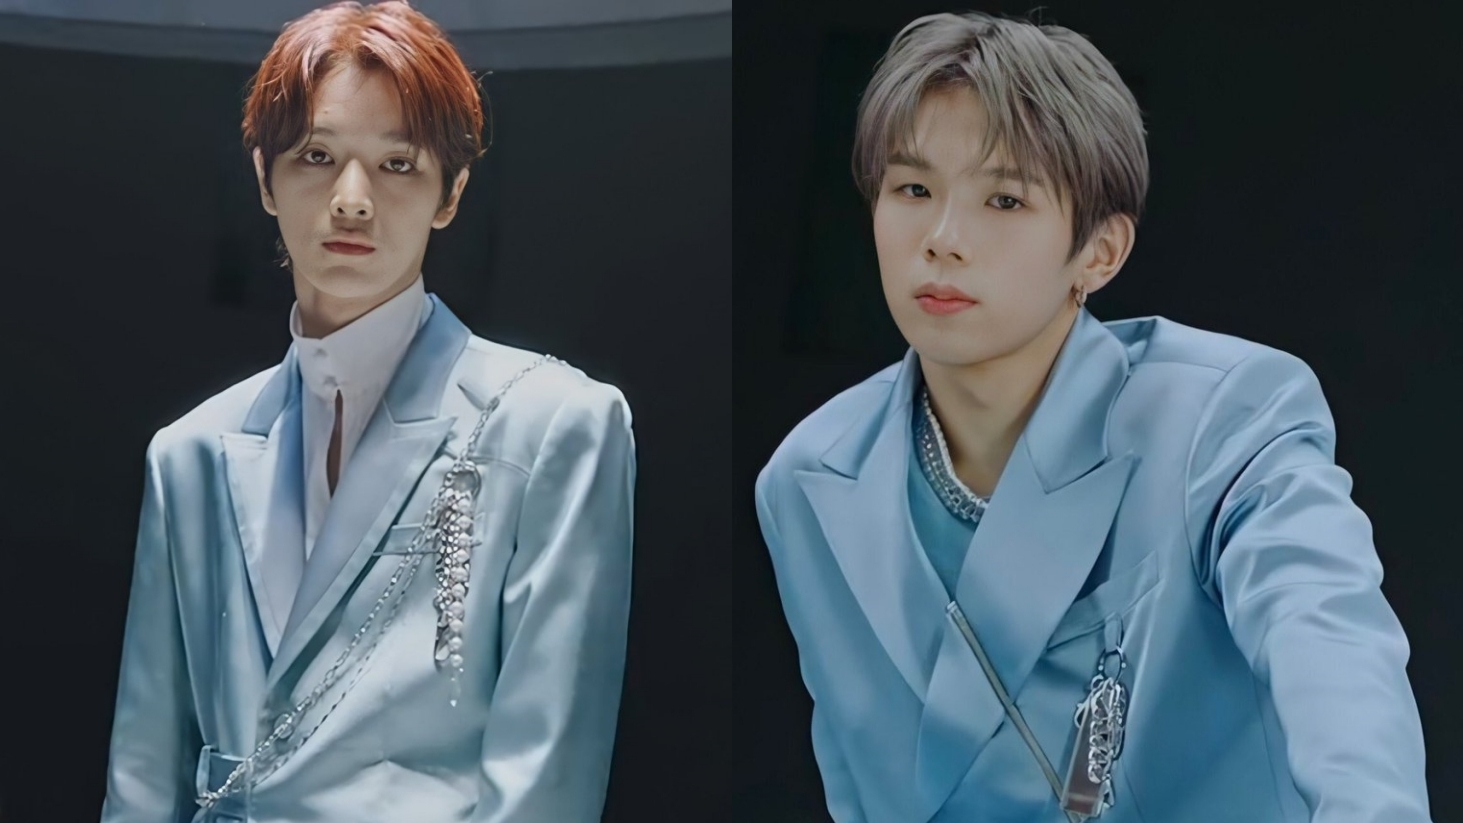 Some Netizens Doubt The Roles of The Two New Members of NCT, Sungchan and Shotaro